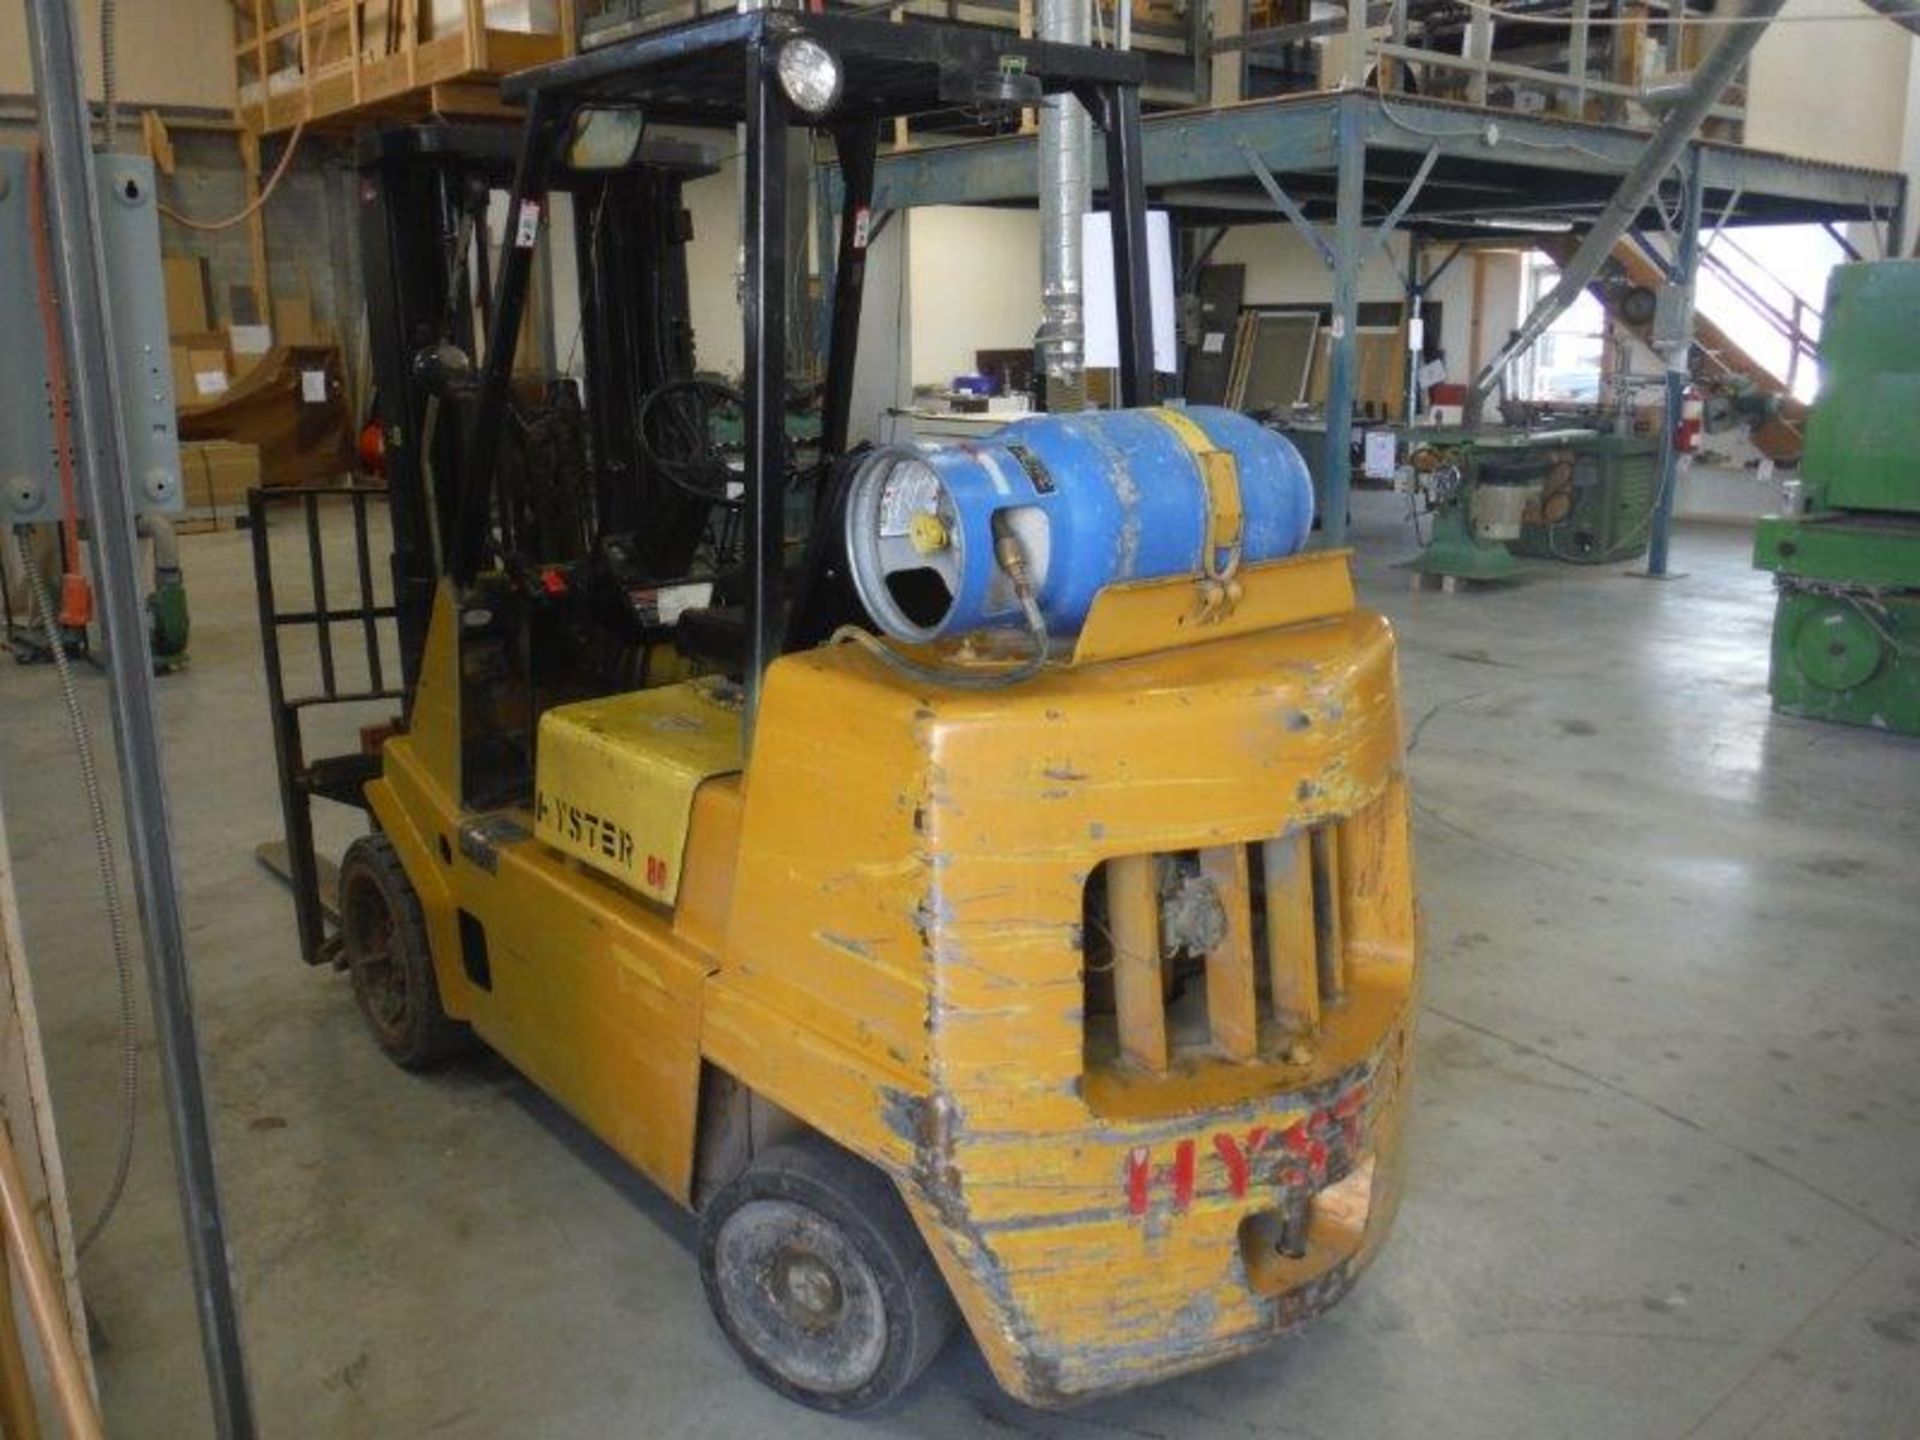 "HYSTER" PROPANE LIFT TRUCK, MODEL S-80 X L, cap: 8,000 lbs, 3-sections, side-shift, solid tires - Image 5 of 5